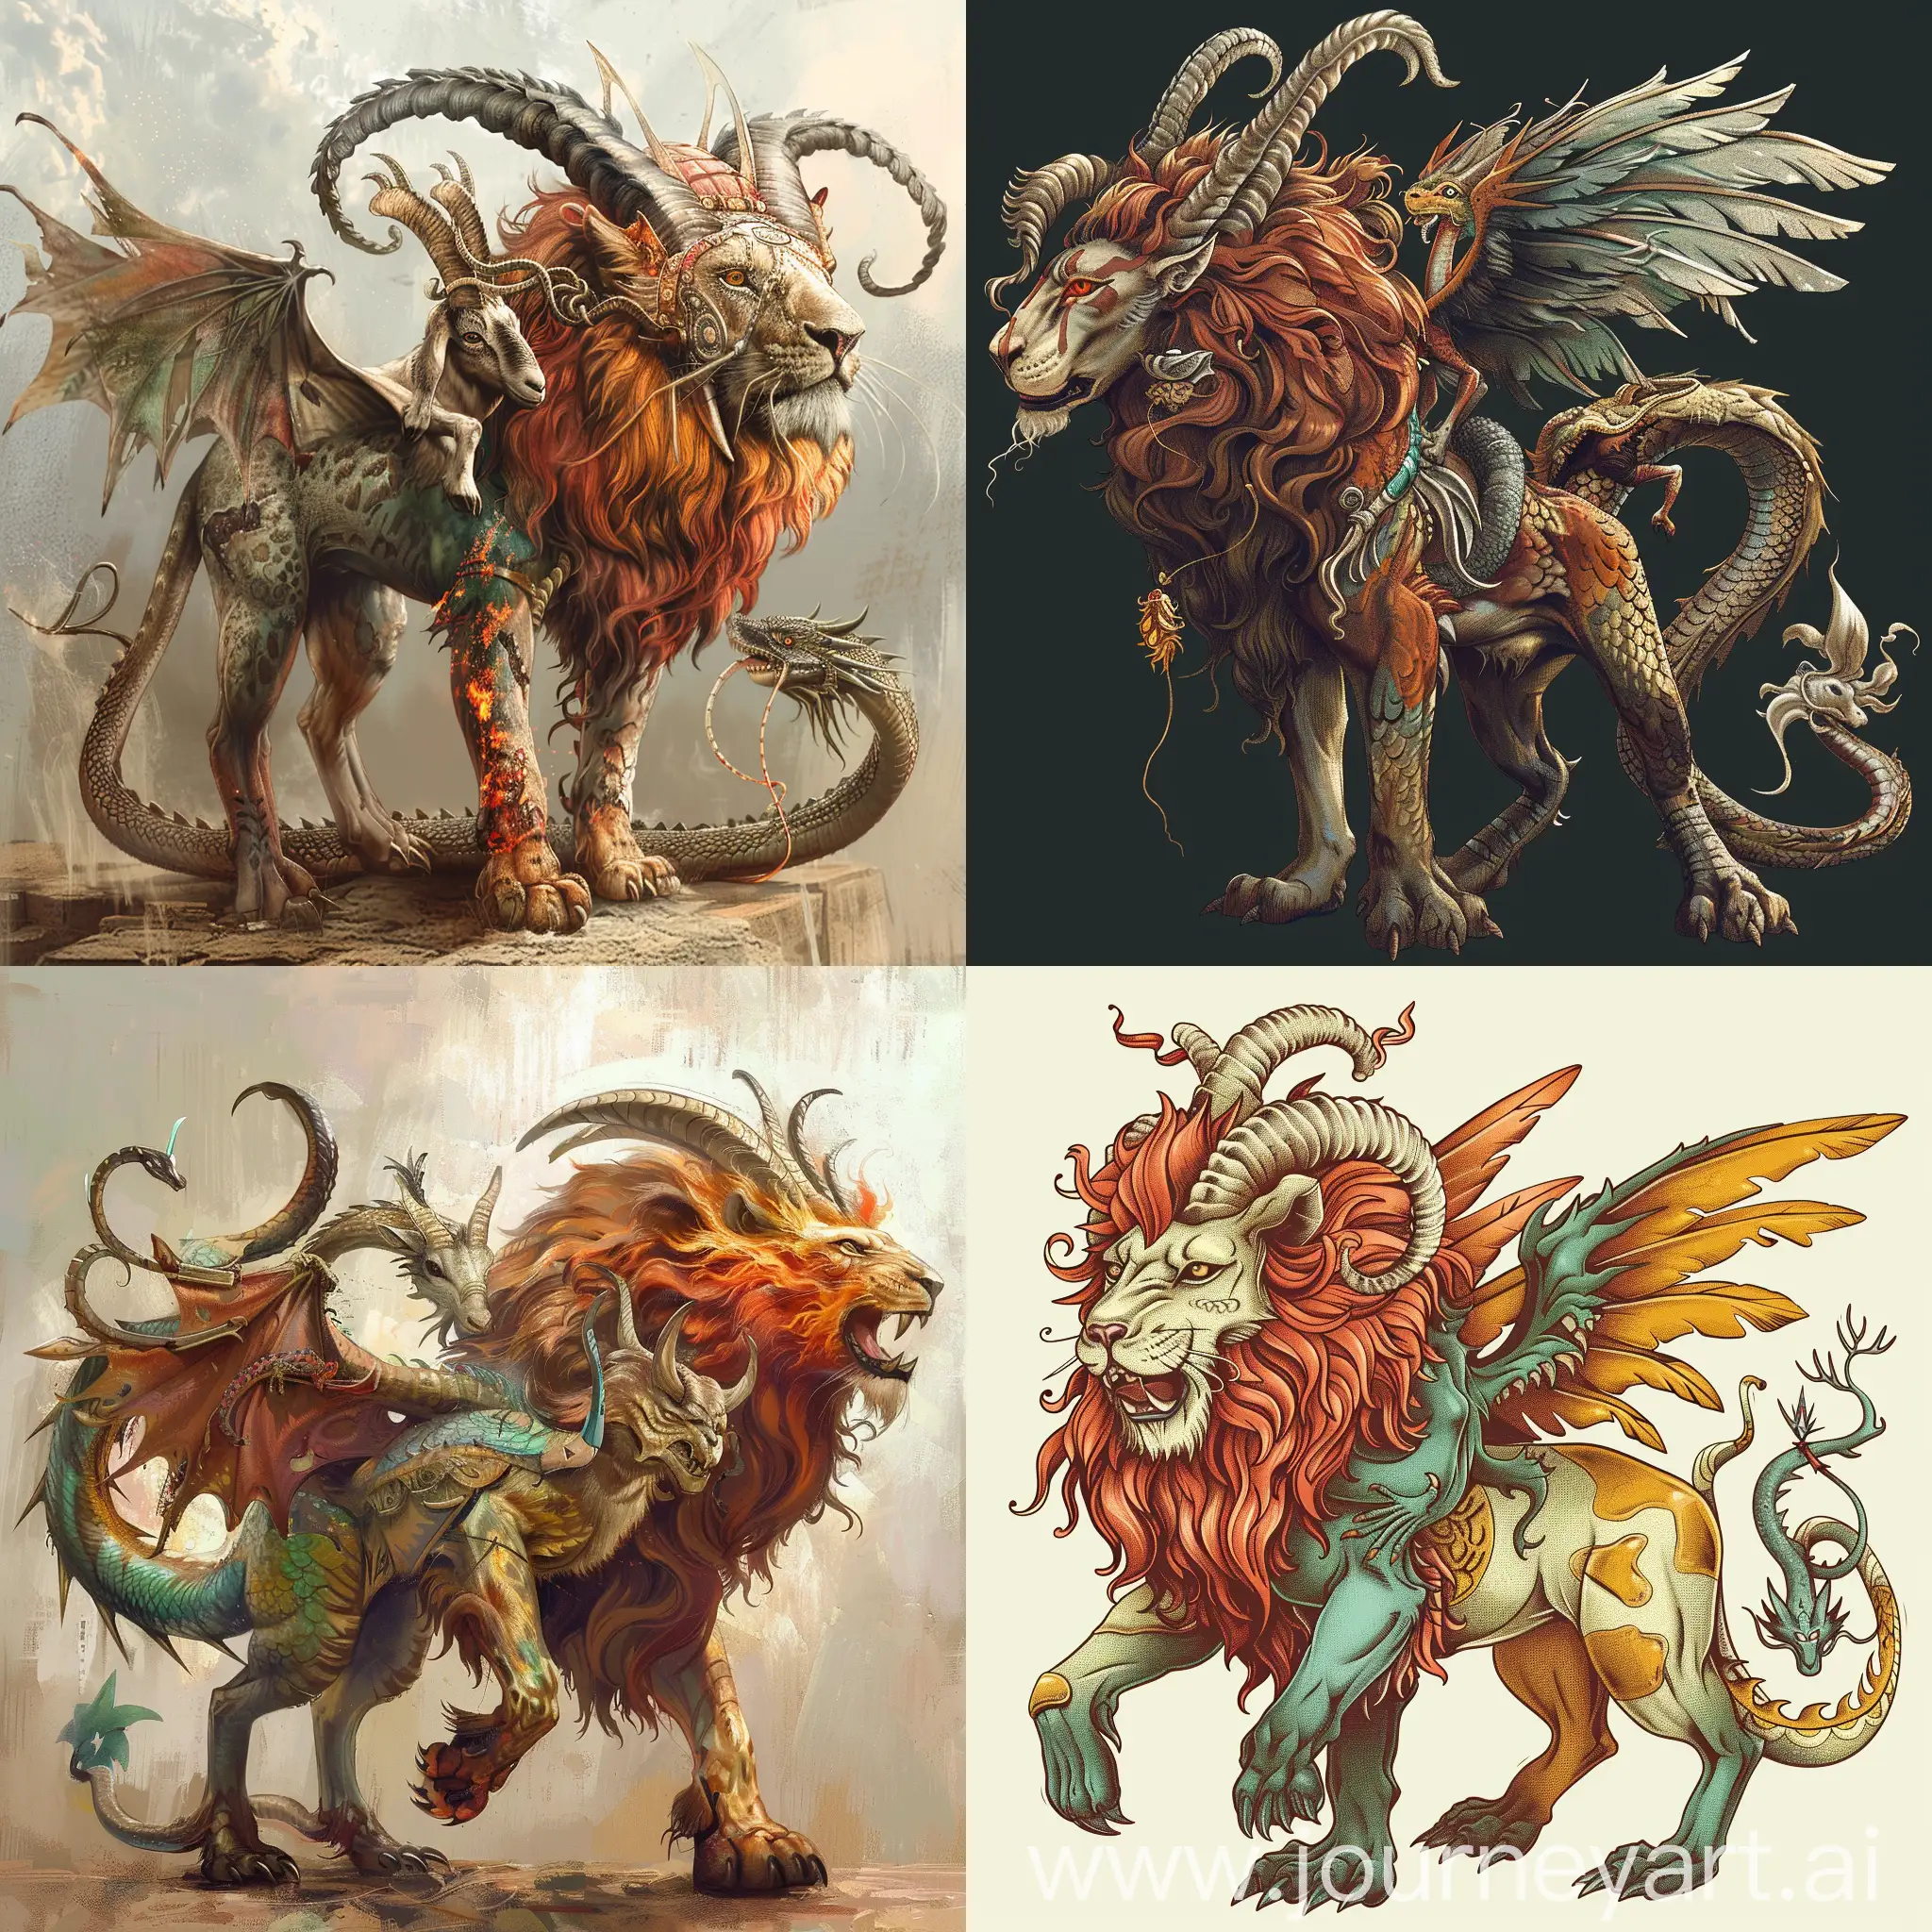 Chimera, a monstrous fire-breathing hybrid creature, composed of different animal parts, as a lion, with the head of a goat protruding from its back, with dragon's wings, and a tail with a snake's head, psychedelic